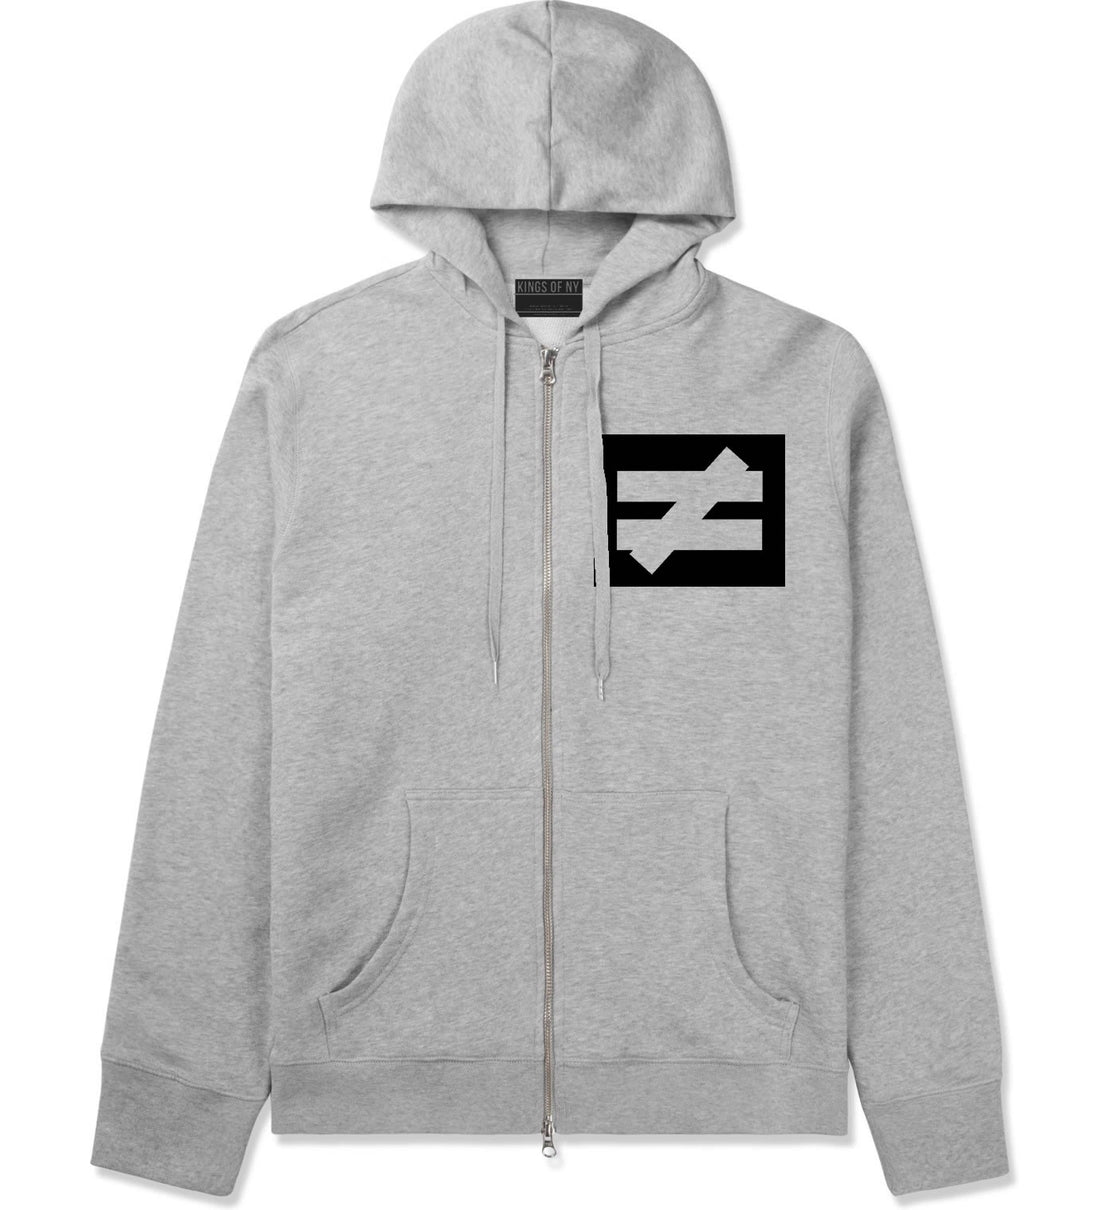 No Equal No Competition Zip Up Hoodie Hoody in Grey by Kings Of NY